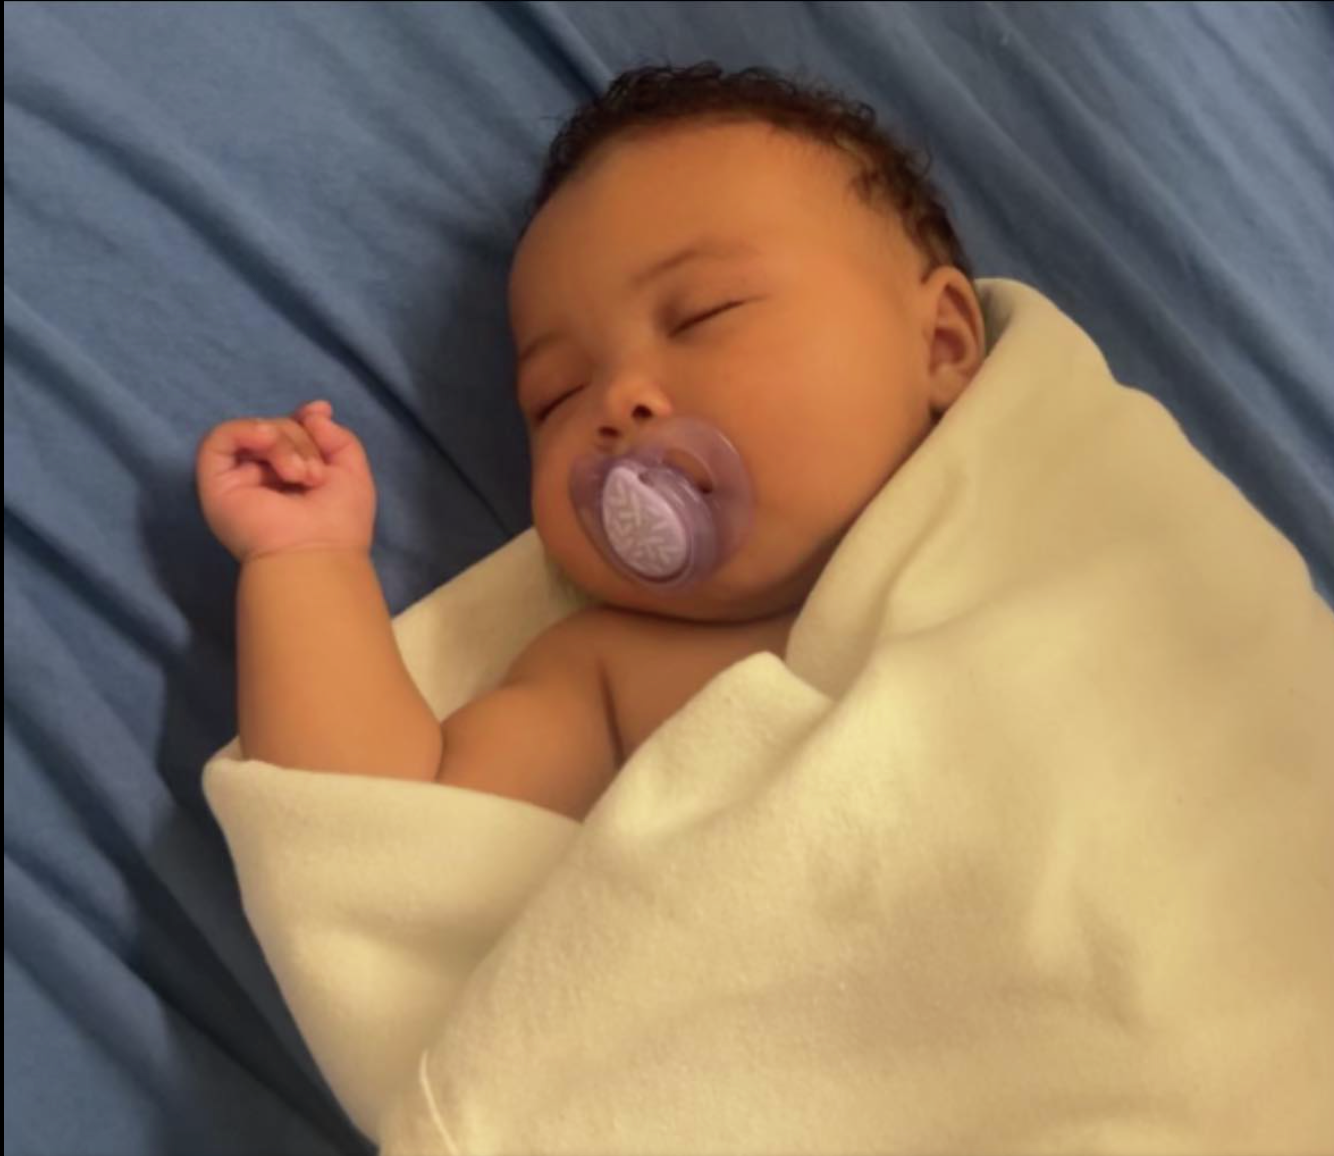 Baby found on Detroit's westside, police looking for parents